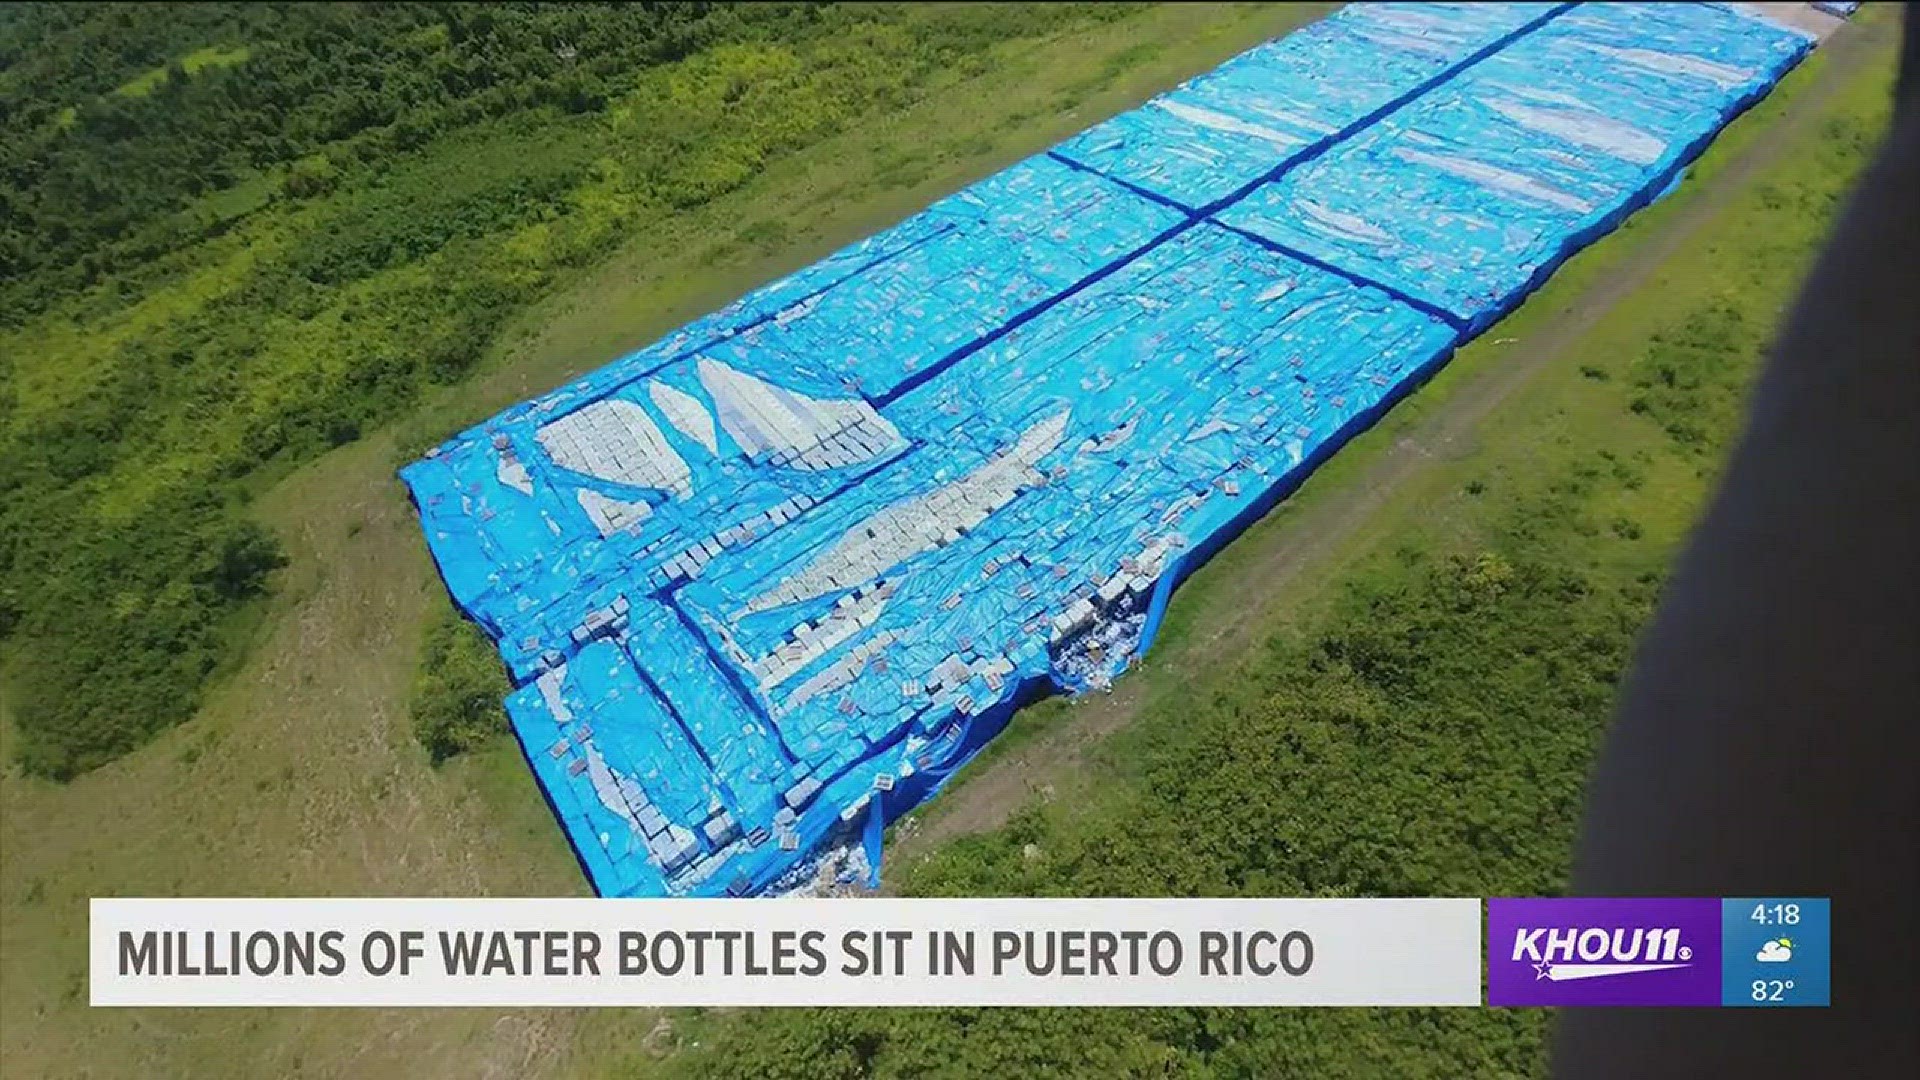 The federal government's response to Hurricane Maria is under fresh scrutiny over photos showing what appear to be millions of water bottles meant for victims still sitting on a runway in Ceiba, Puerto Rico, more than one year after the storm.